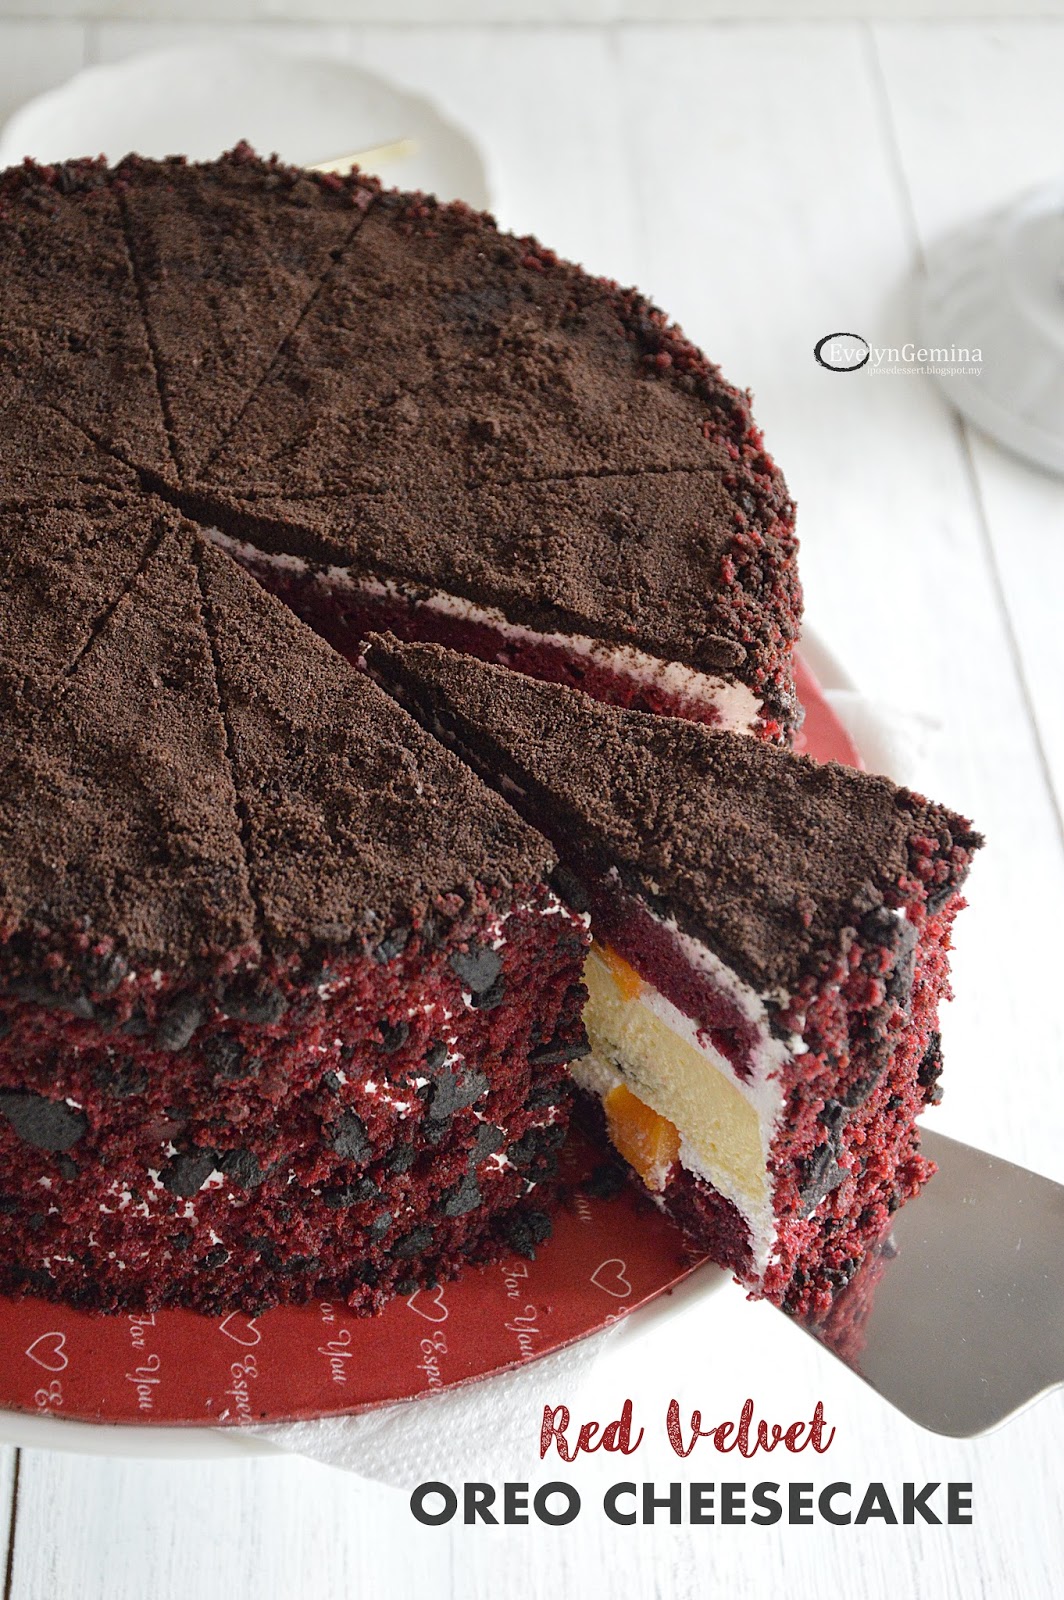 RED VELVET OREO CHEESECAKE special price for this month!!!